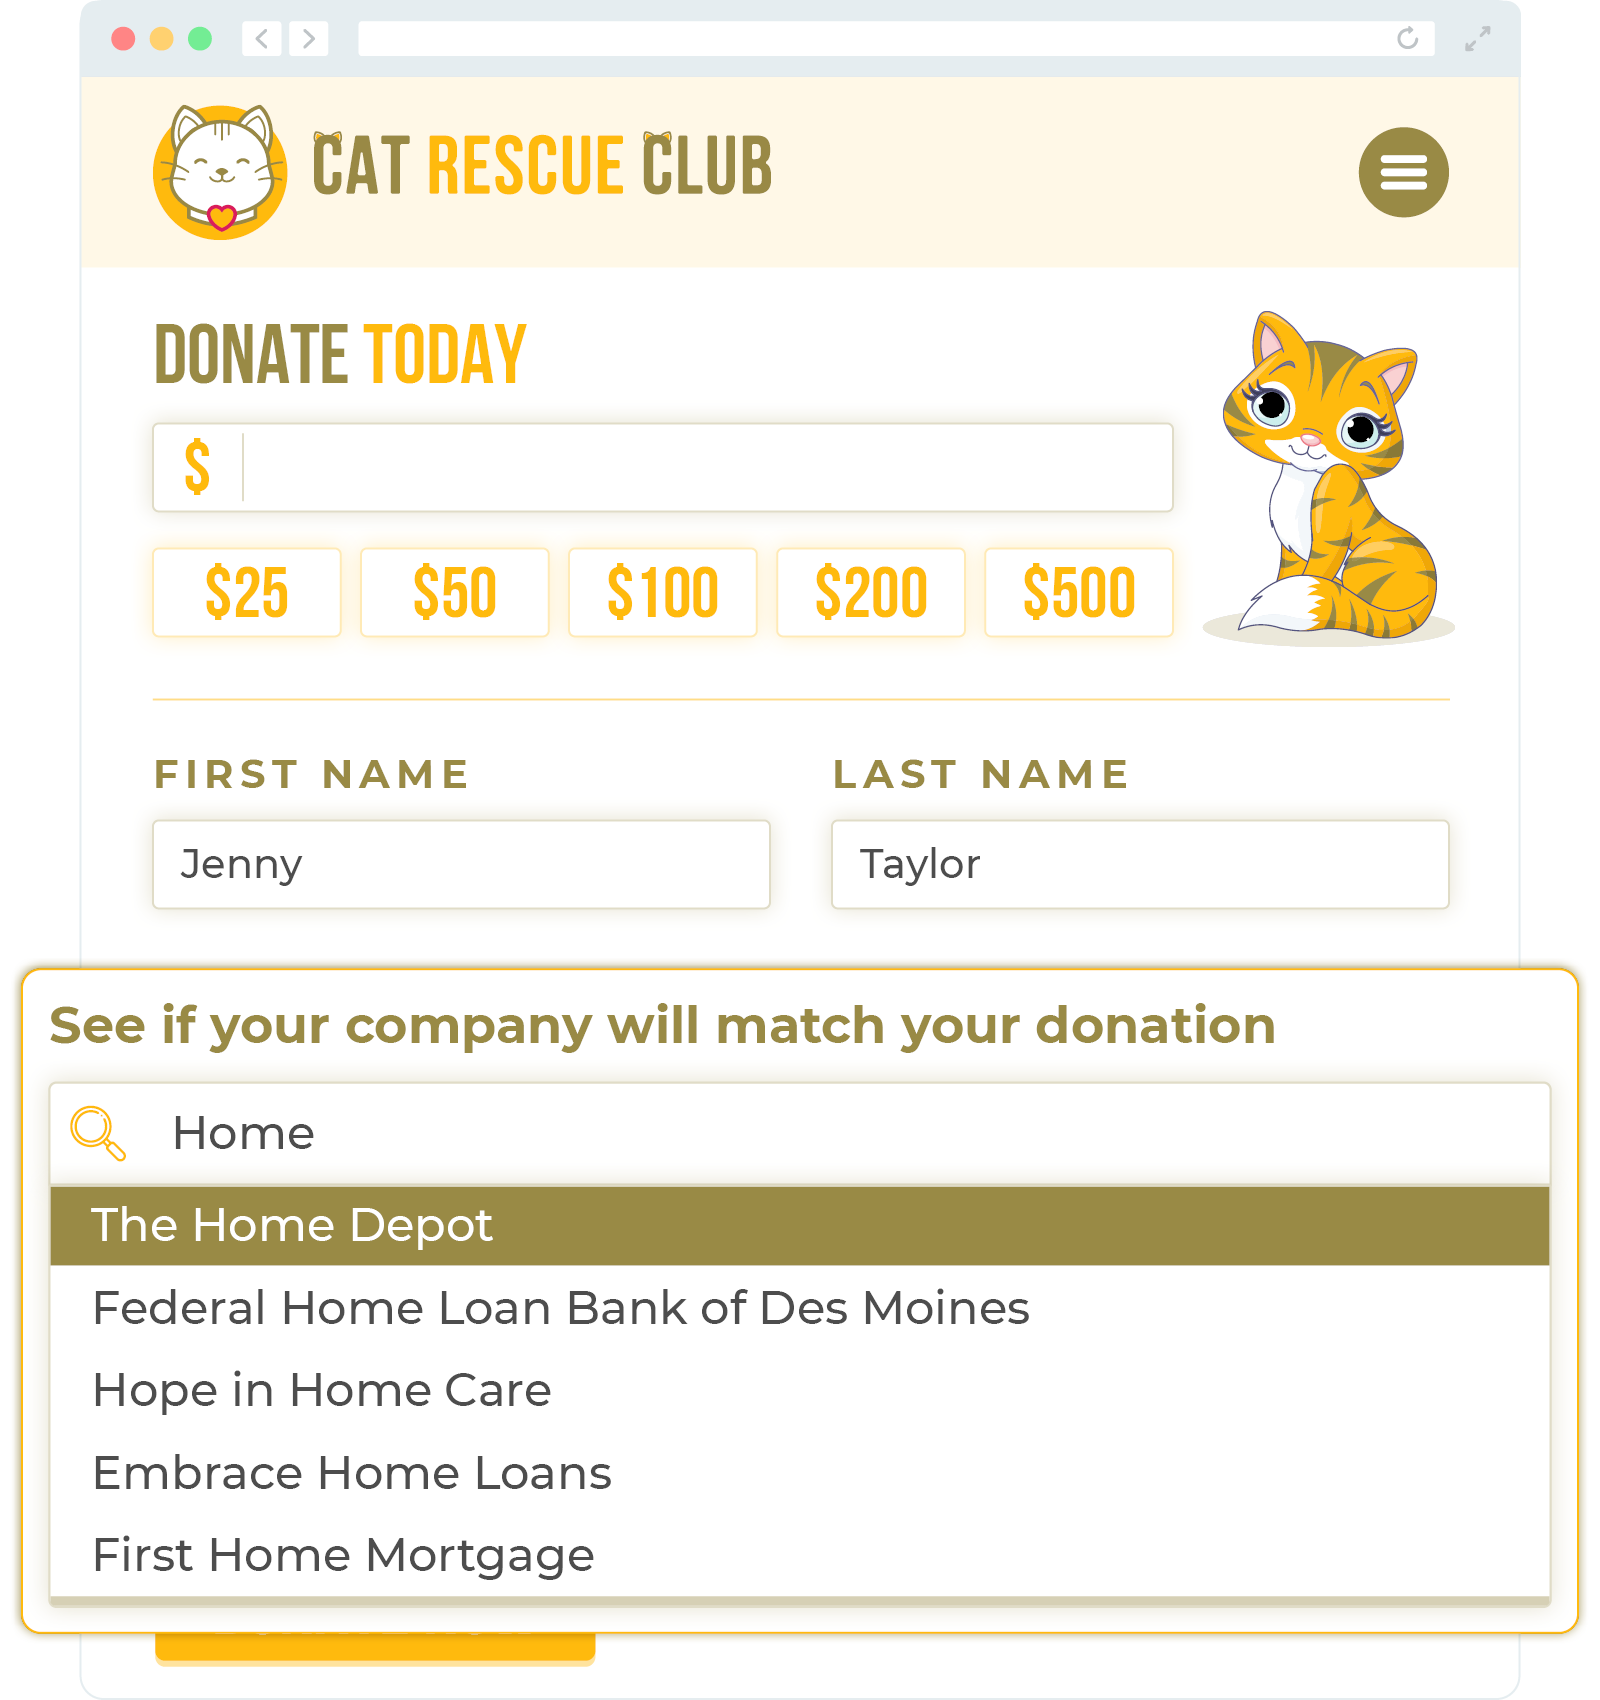 Increase matching gift awareness with your giving forms